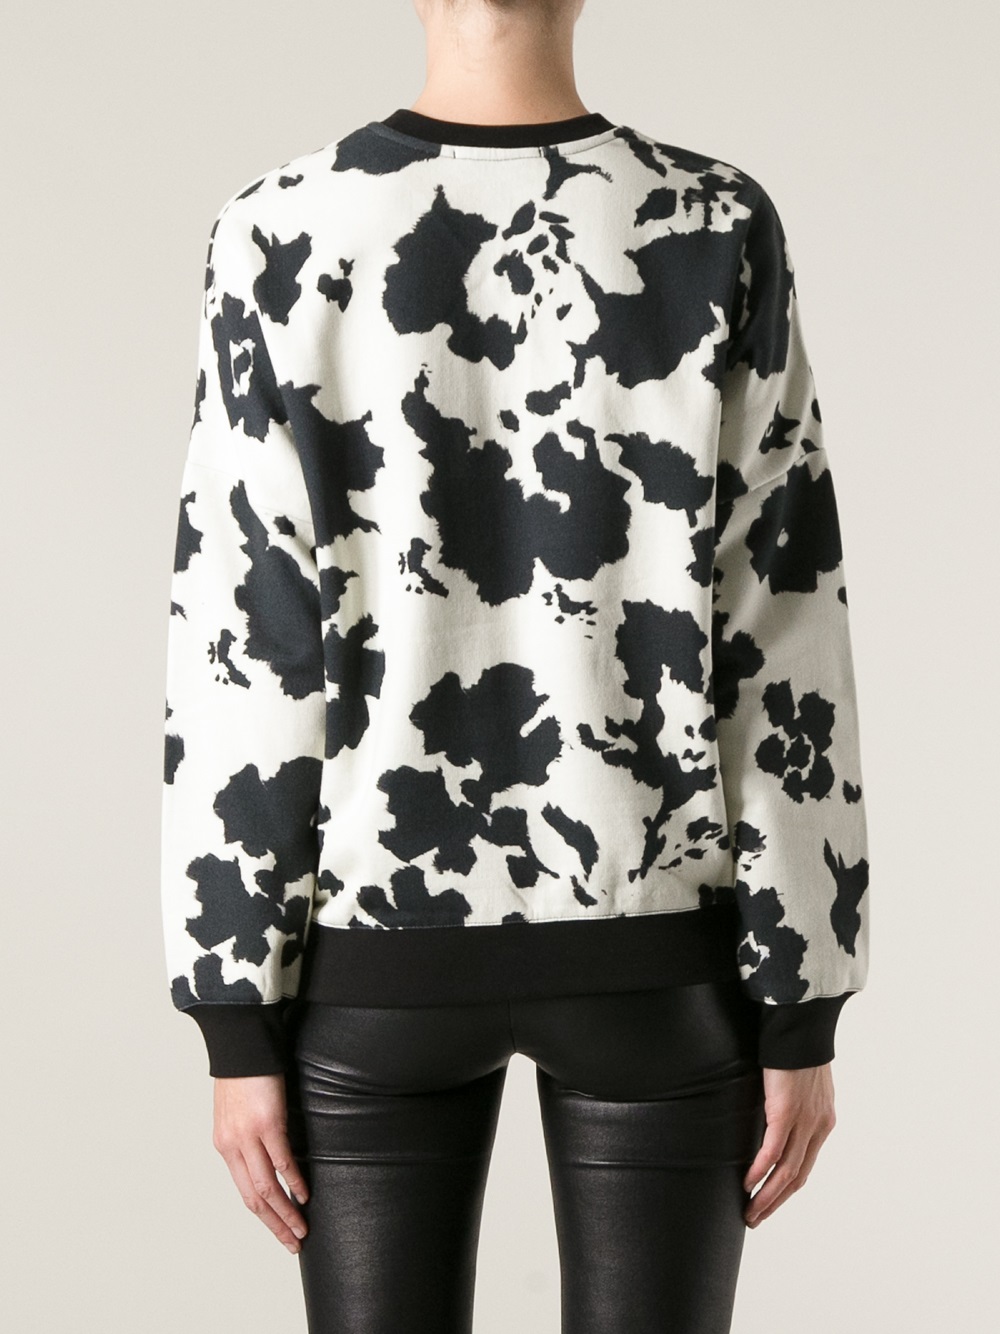 MSGM Cow Print Sweater in Black (White) - Lyst